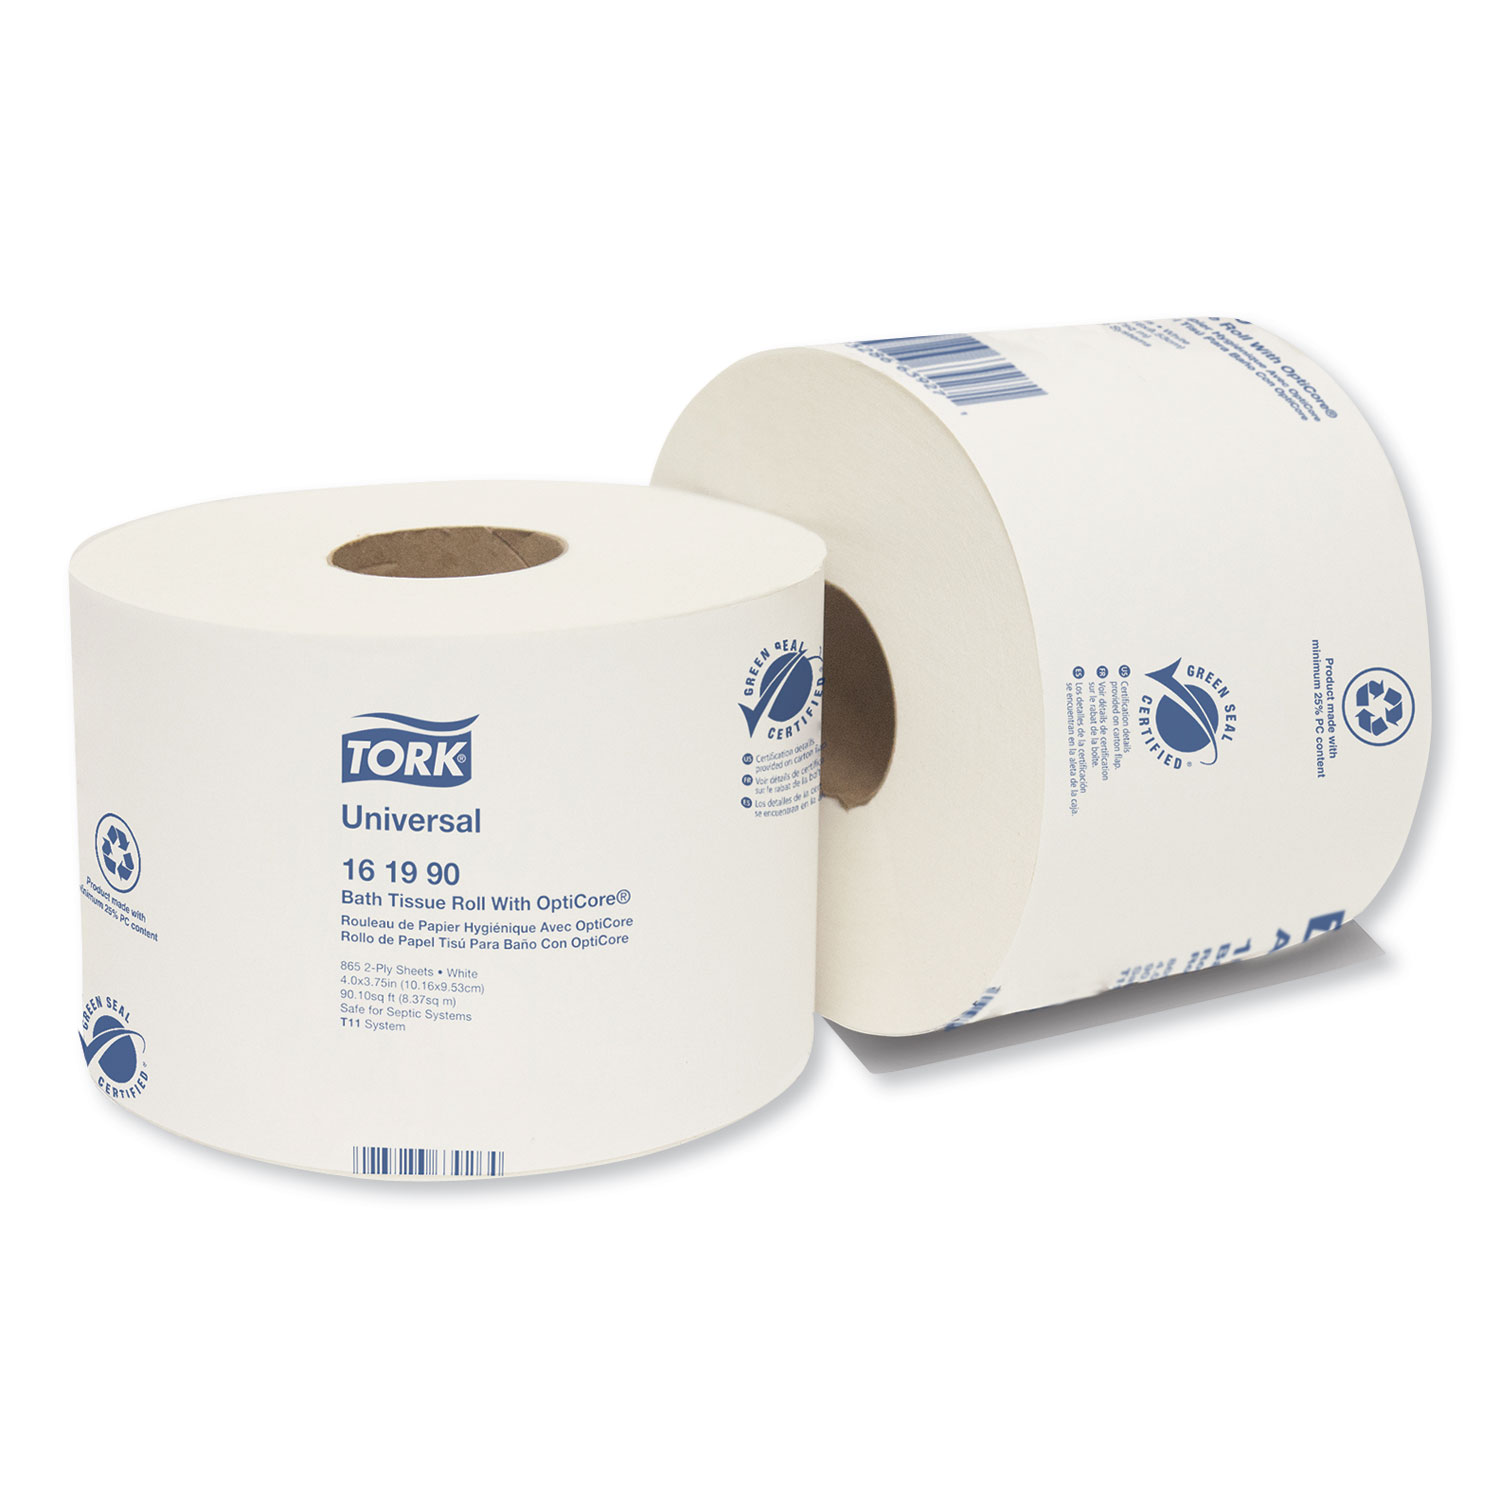  Tork 161990 Universal Bath Tissue Roll with OptiCore, Septic Safe, 2-Ply, White, 865 Sheets/Roll, 36/Carton (TRK161990) 